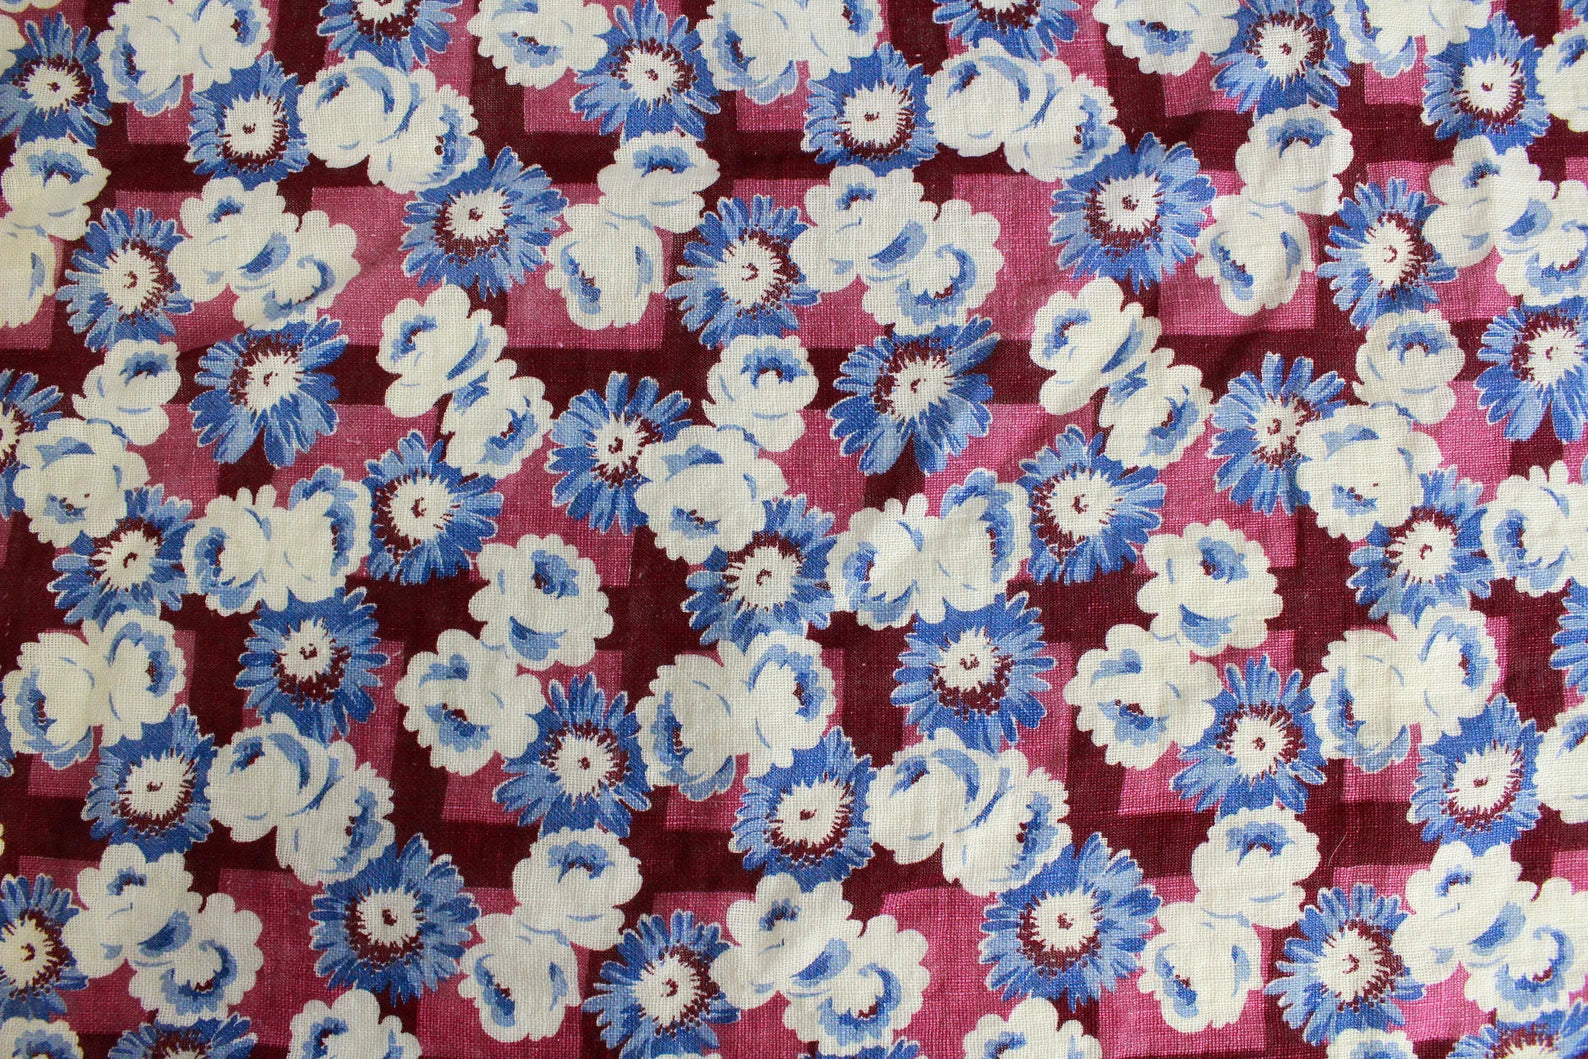 1940s Purple Floral Print Cotton Fabric, 3.4 Yards, Vintage Sewing Fabric